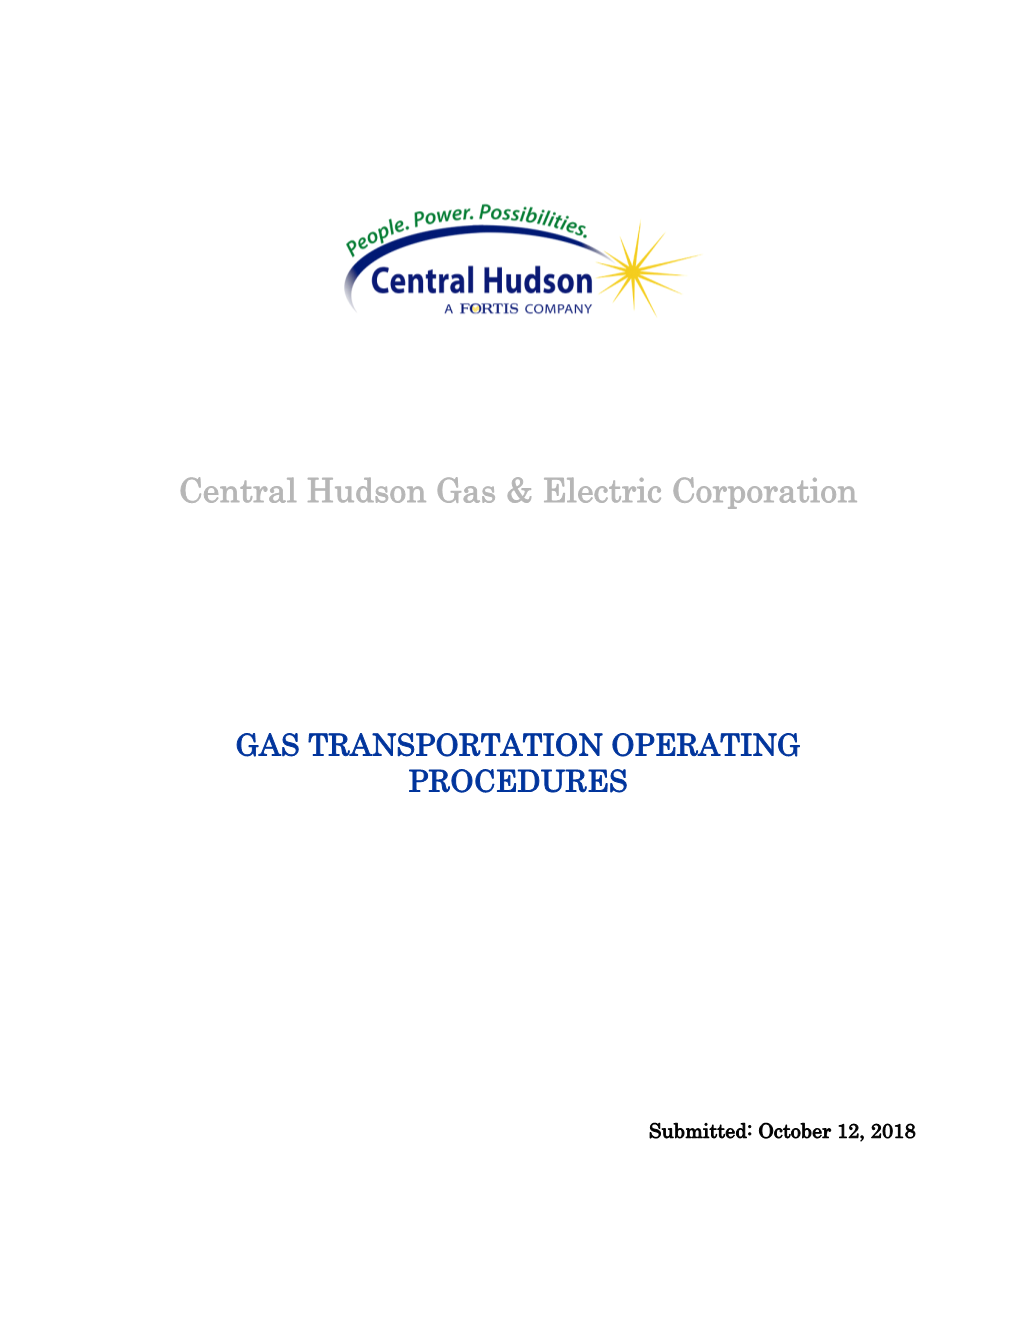 Central Hudson Gas & Electric Corporation